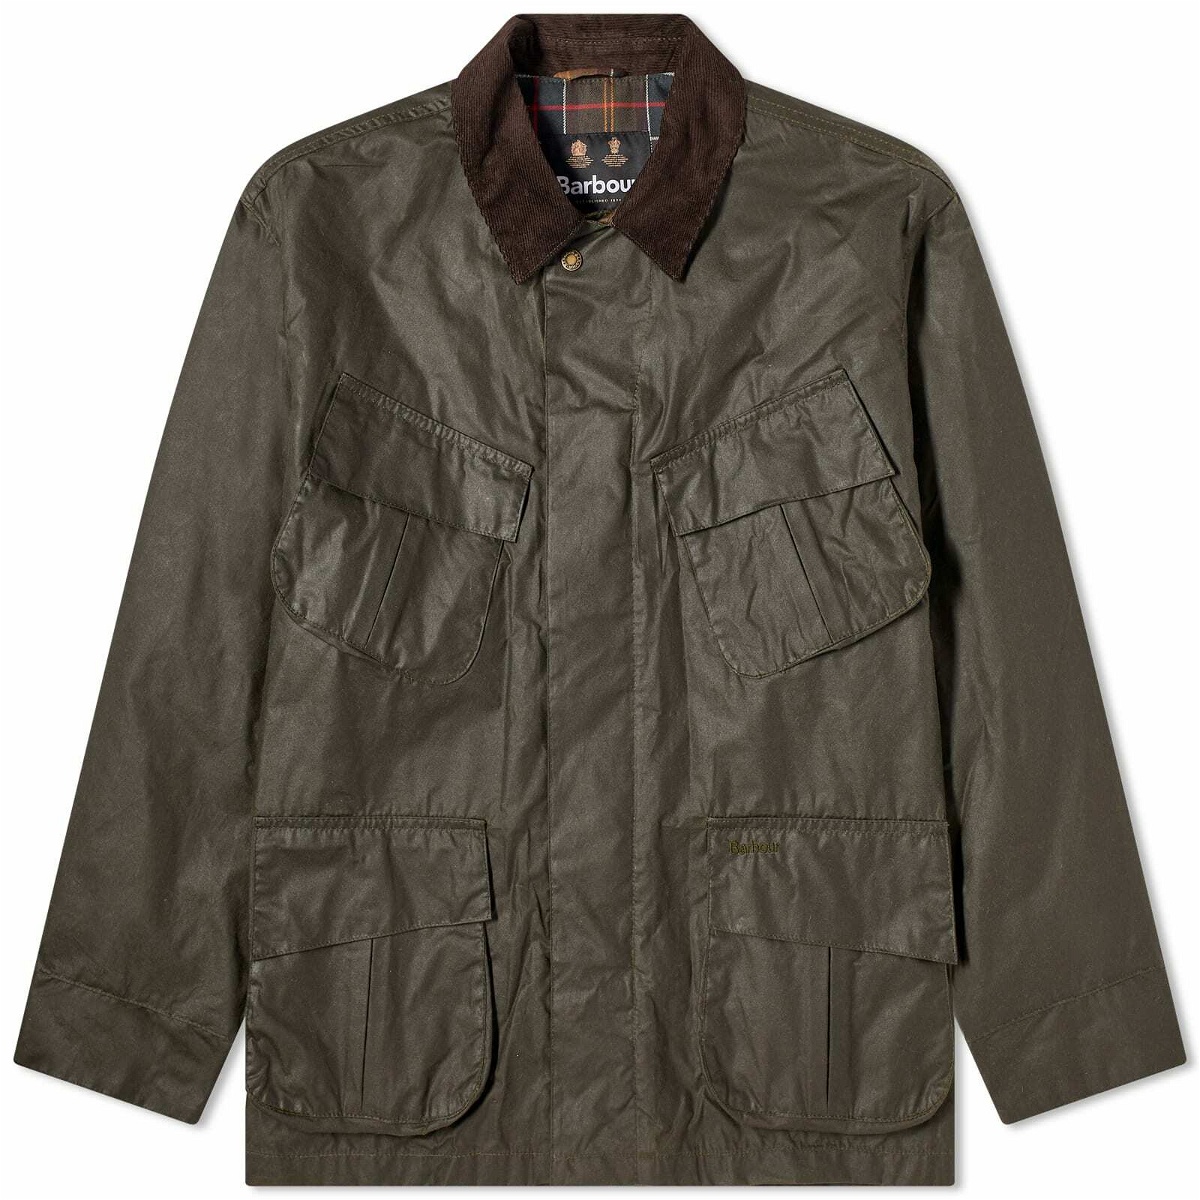 Barbour Men's Heritage+ Utility Wax Jacket in Archive Olive Barbour